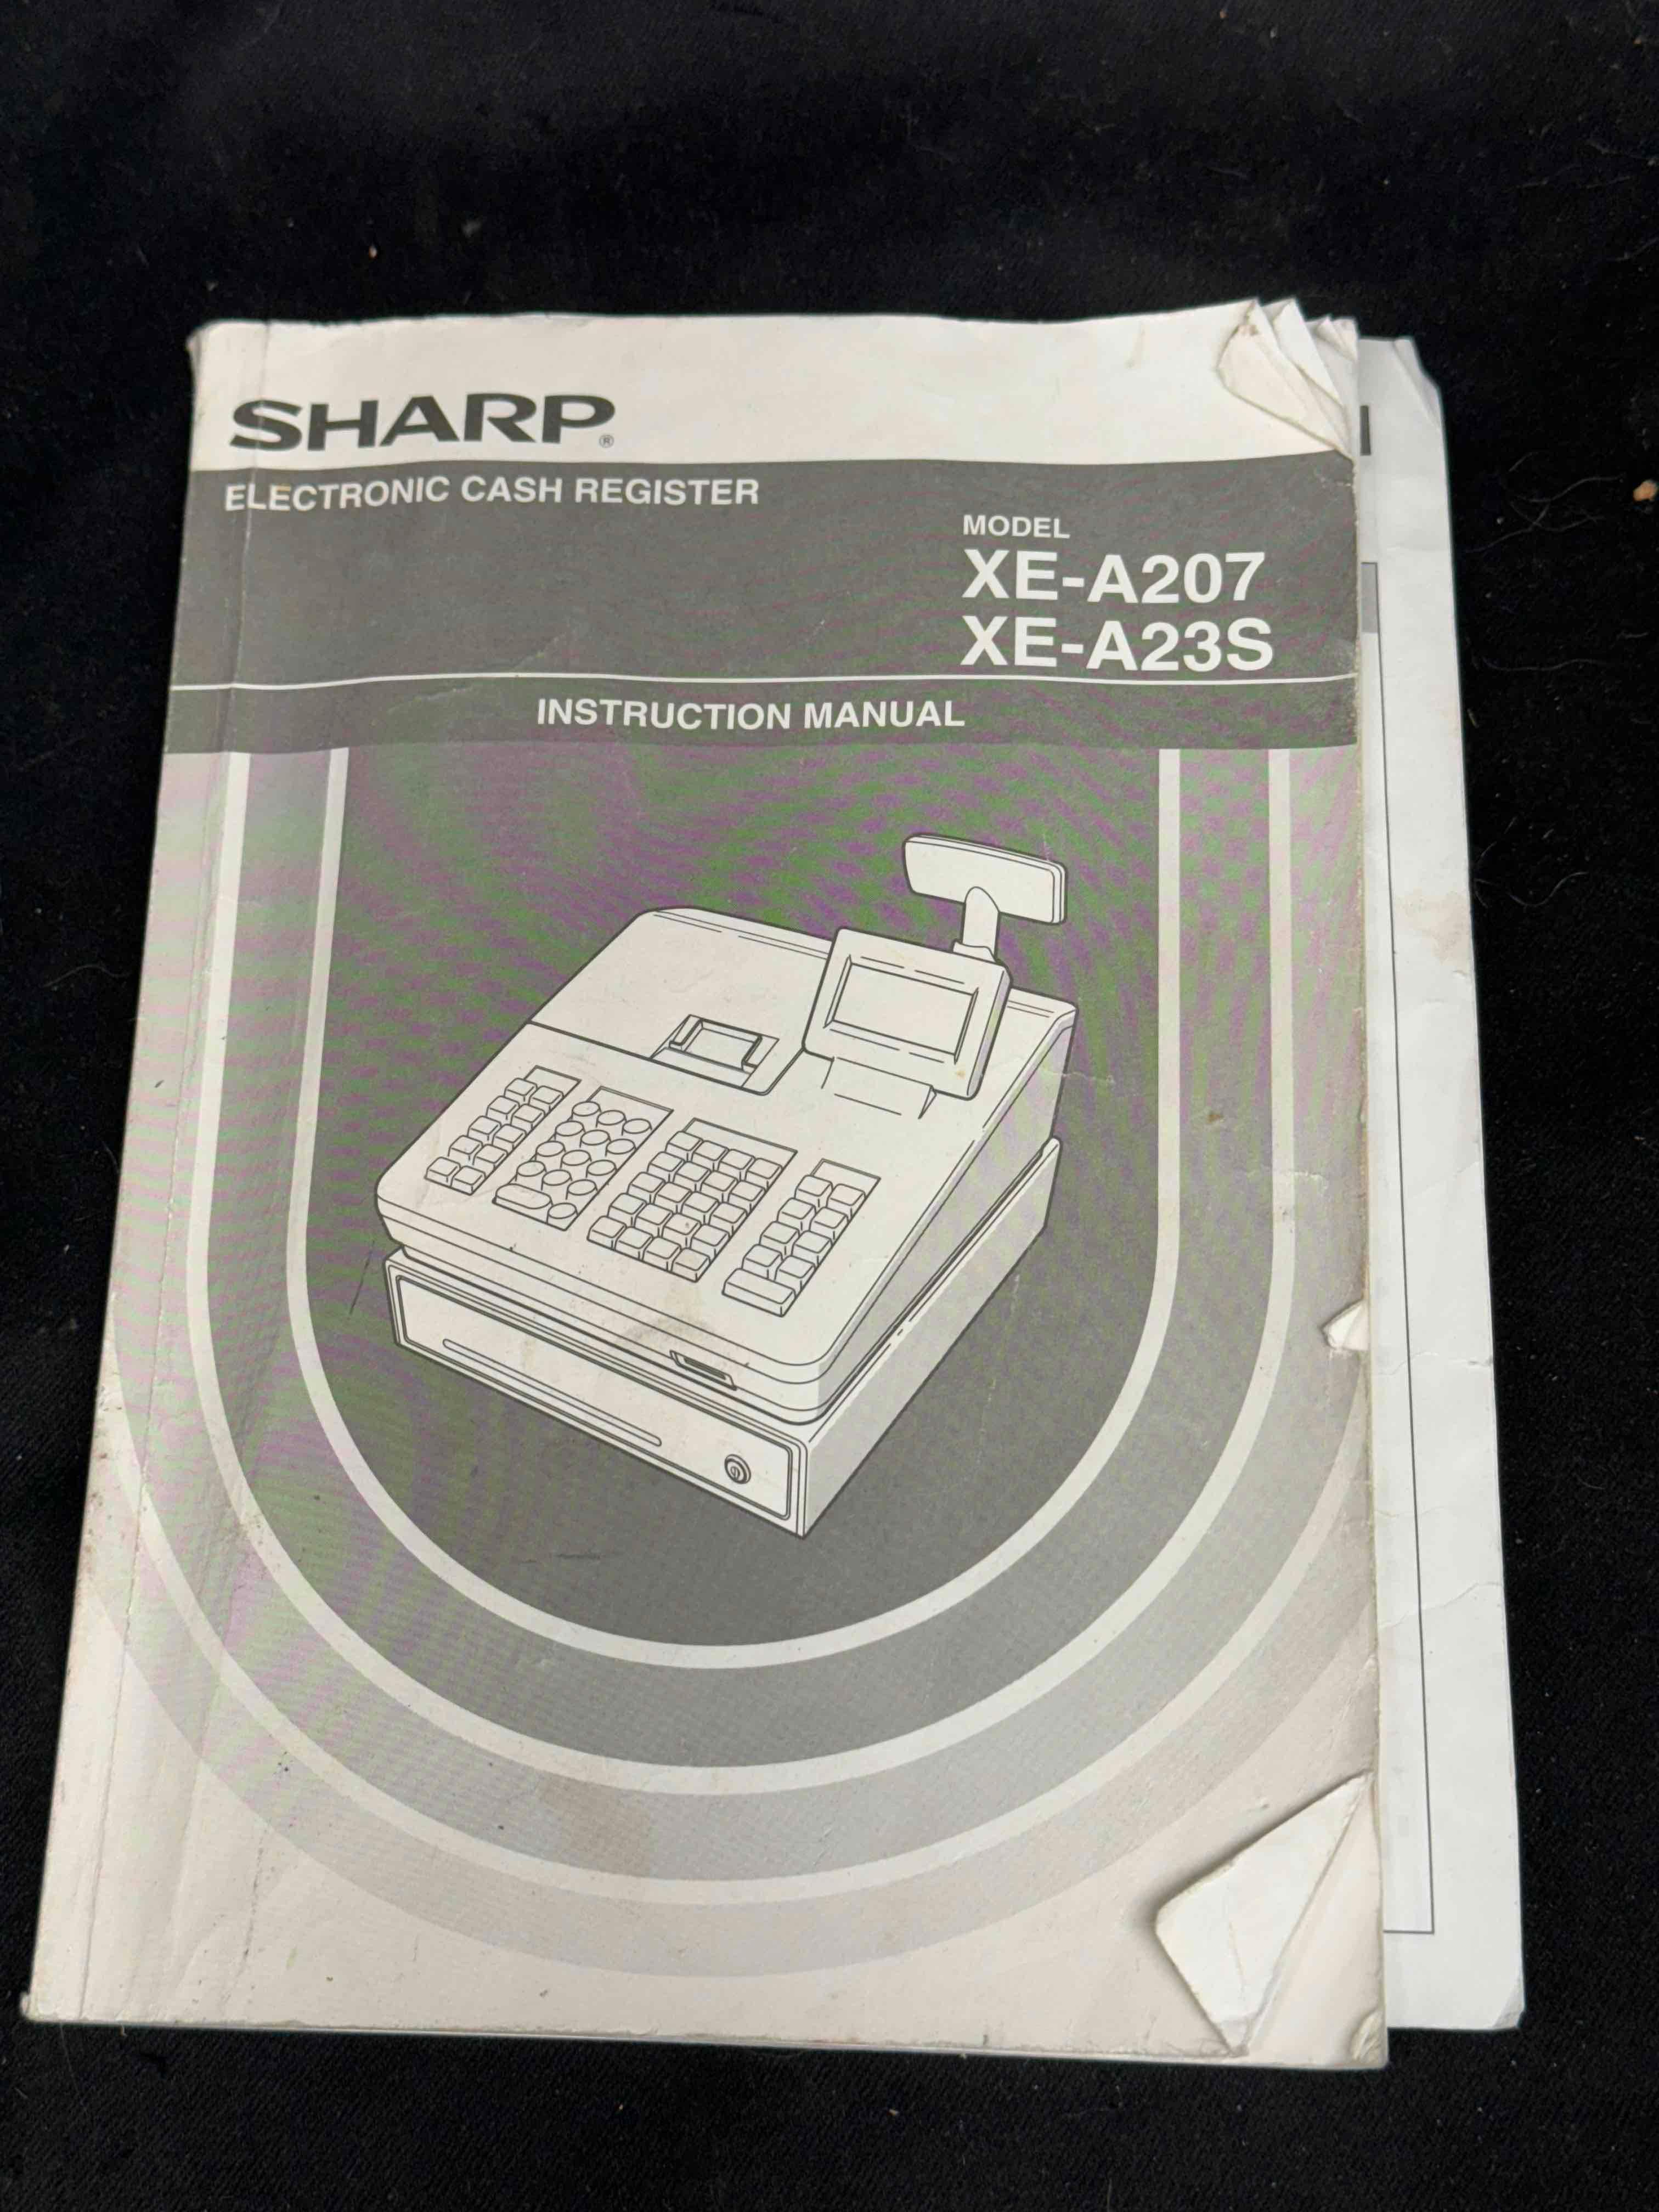 Sharp XE-A207 Cash Register with Key and Manual